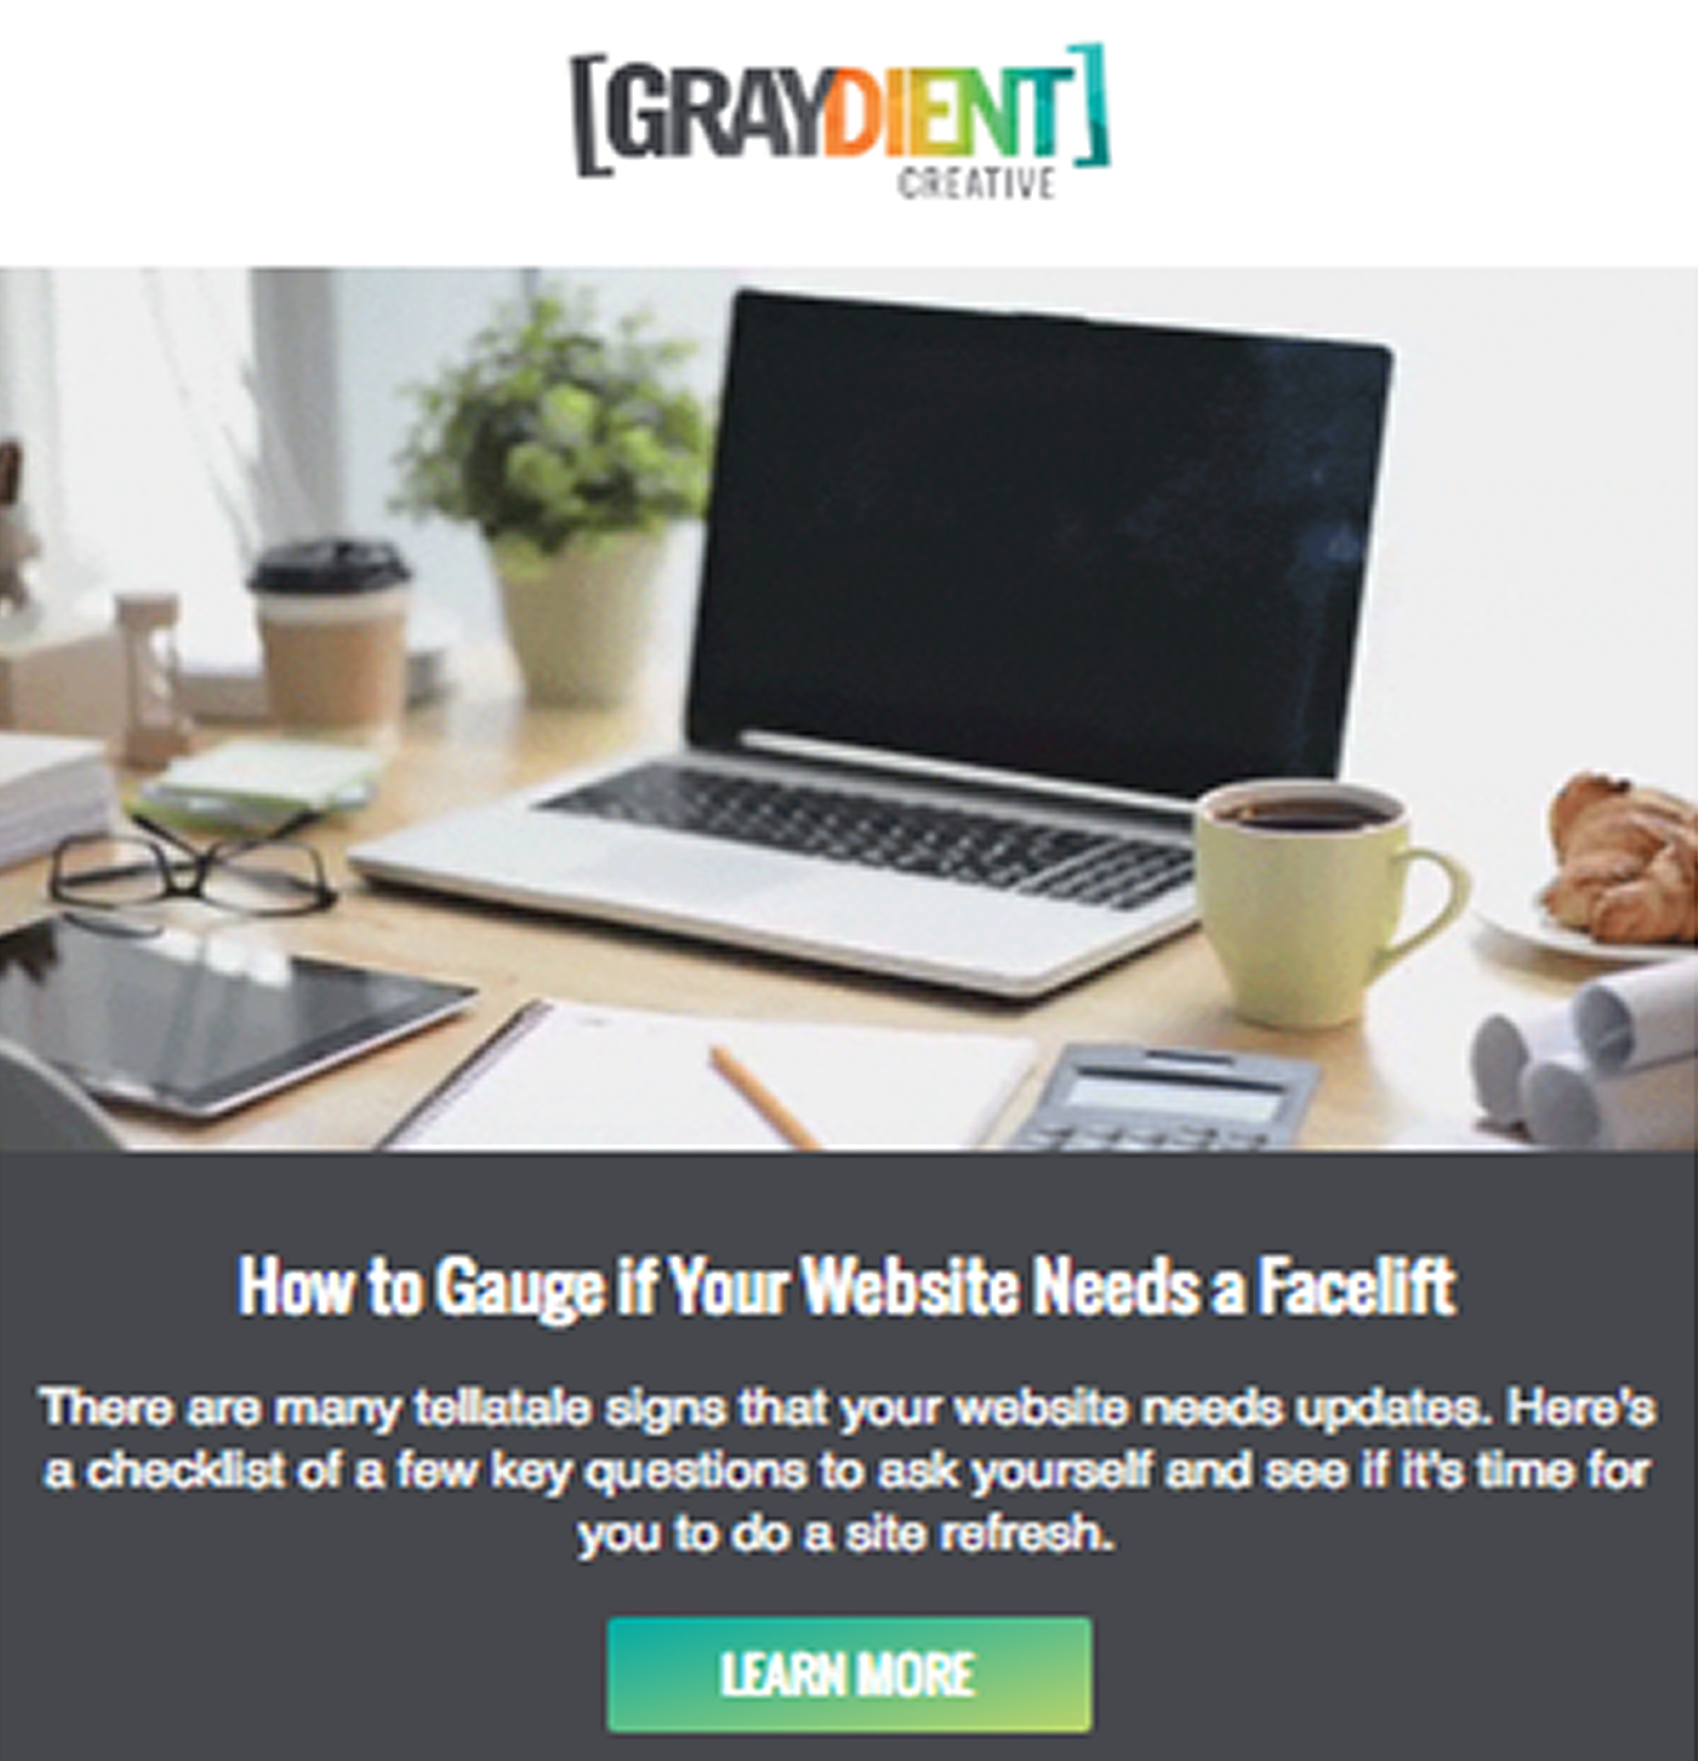 Graydient Creative Email Campaign